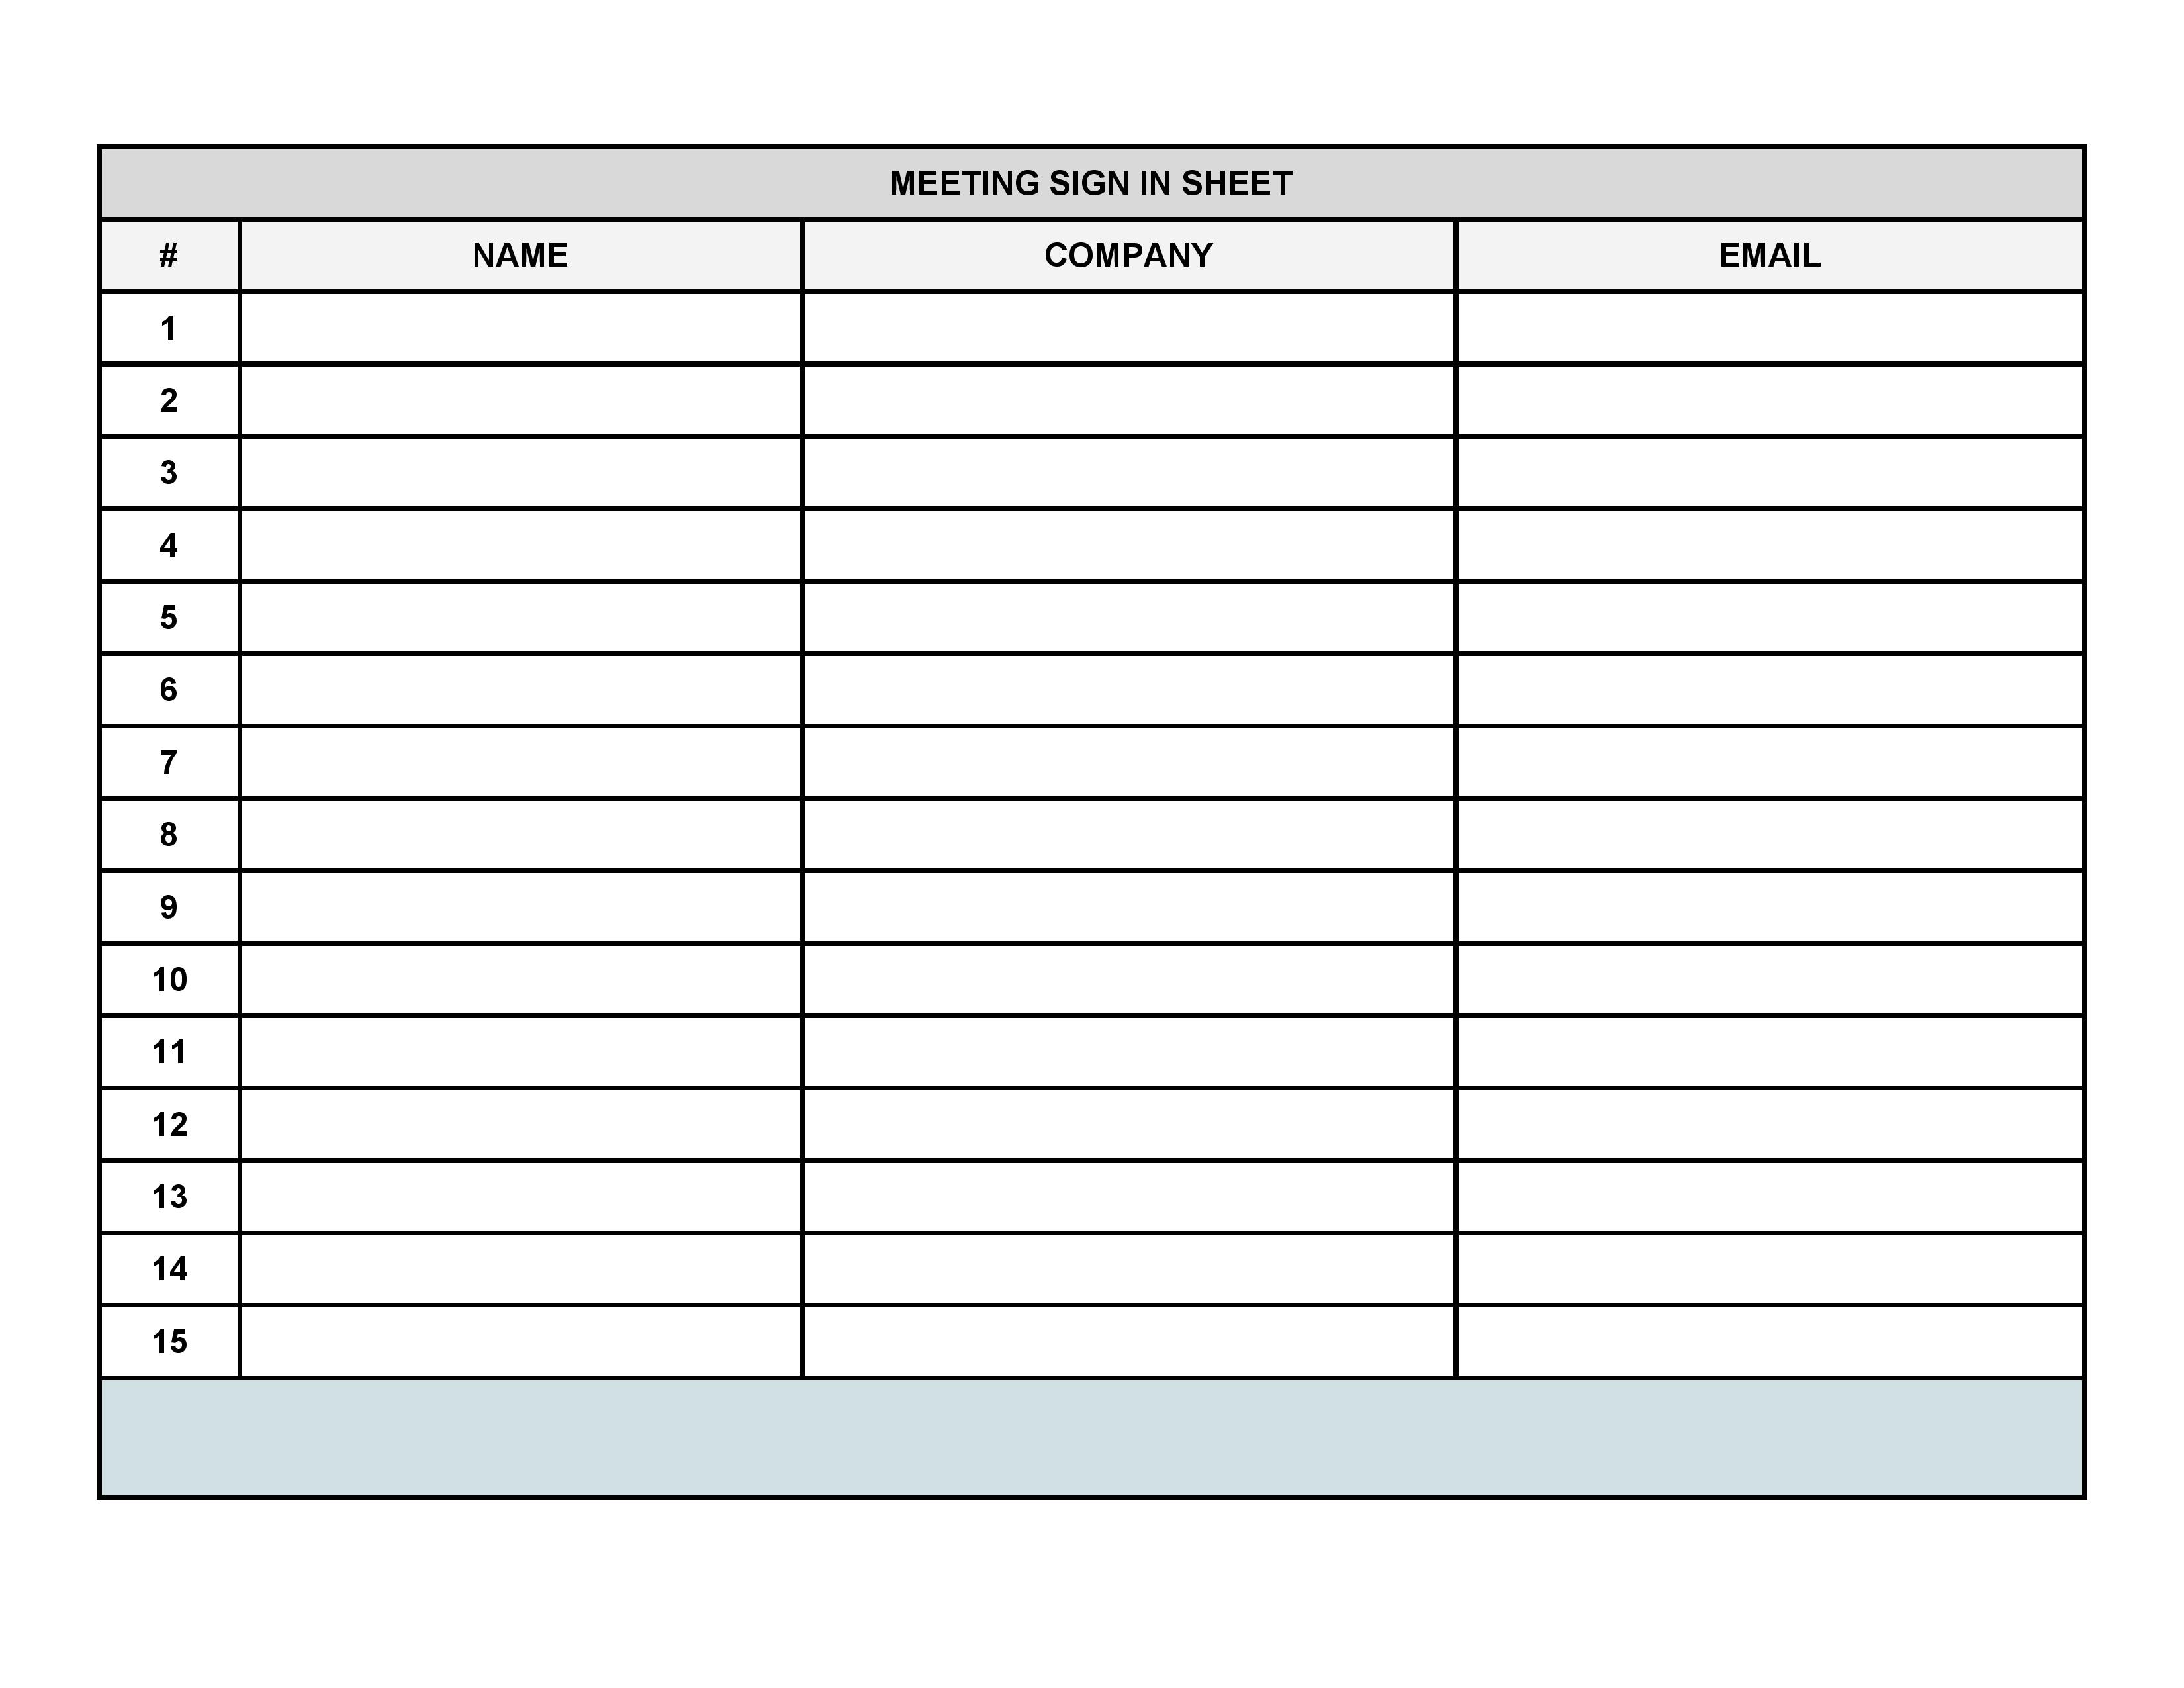 Meeting Sign In Sheet Within Meeting Sign In Sheet Template